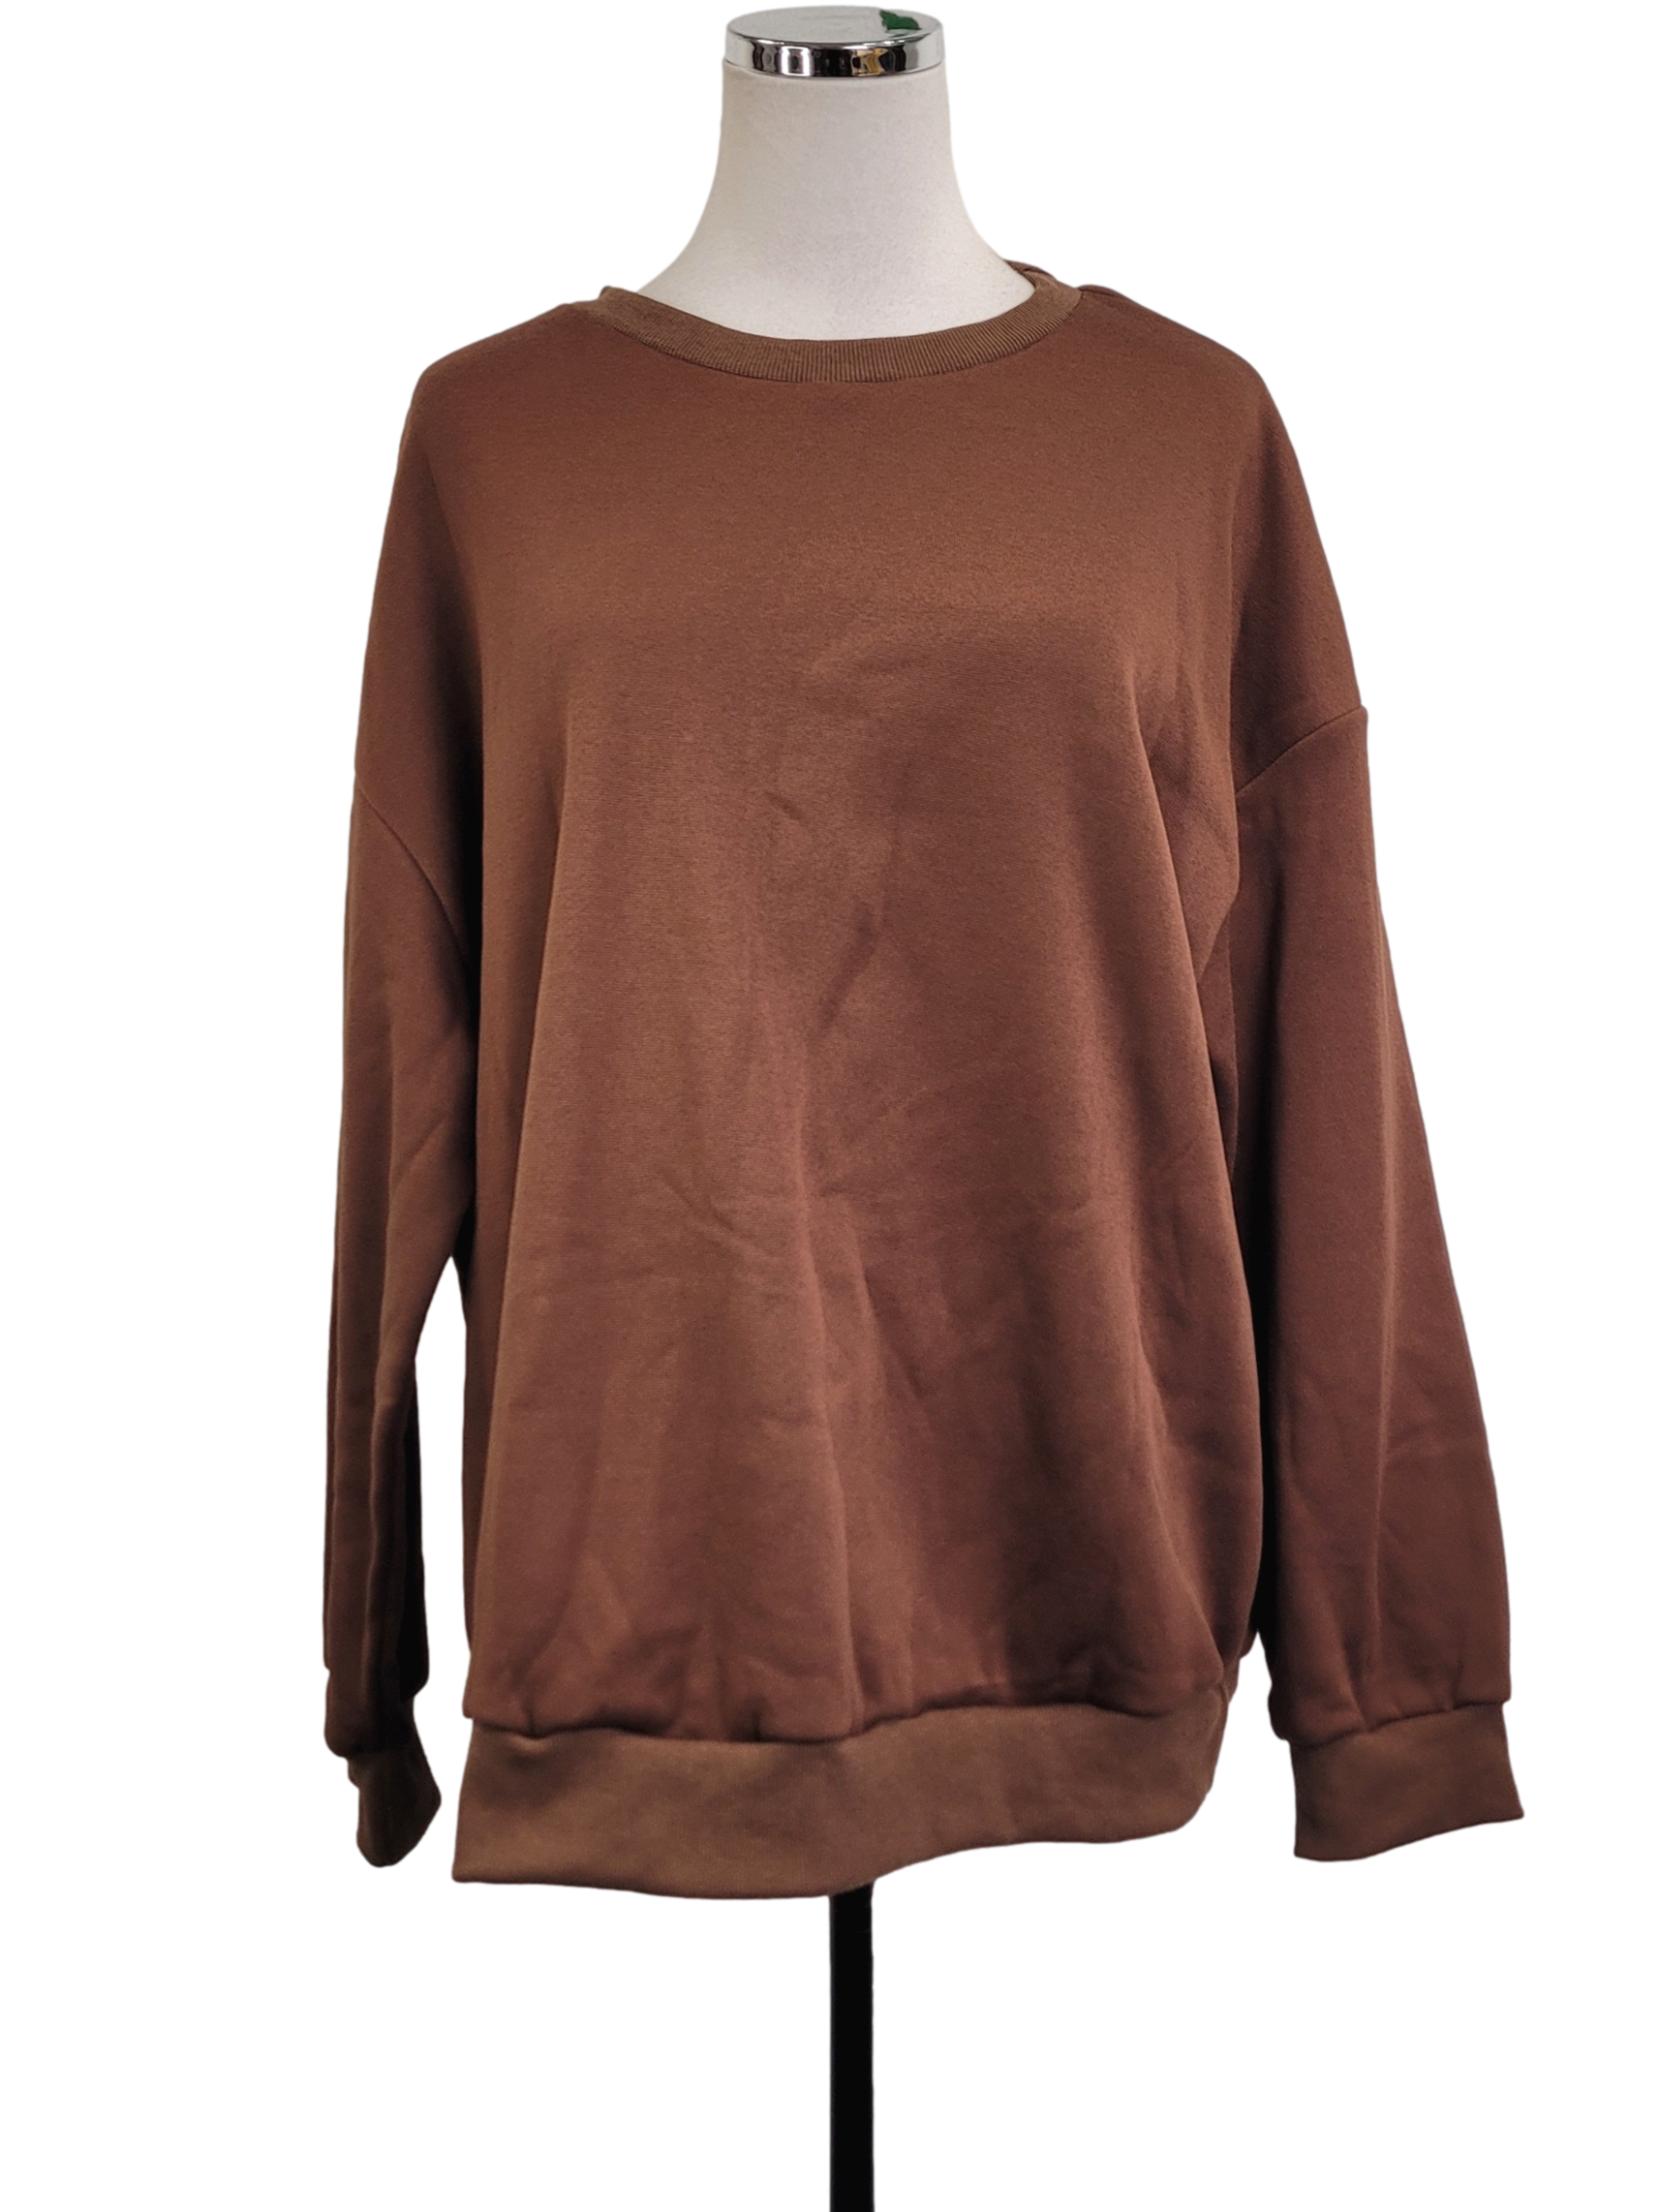 Spice Brown Sweater